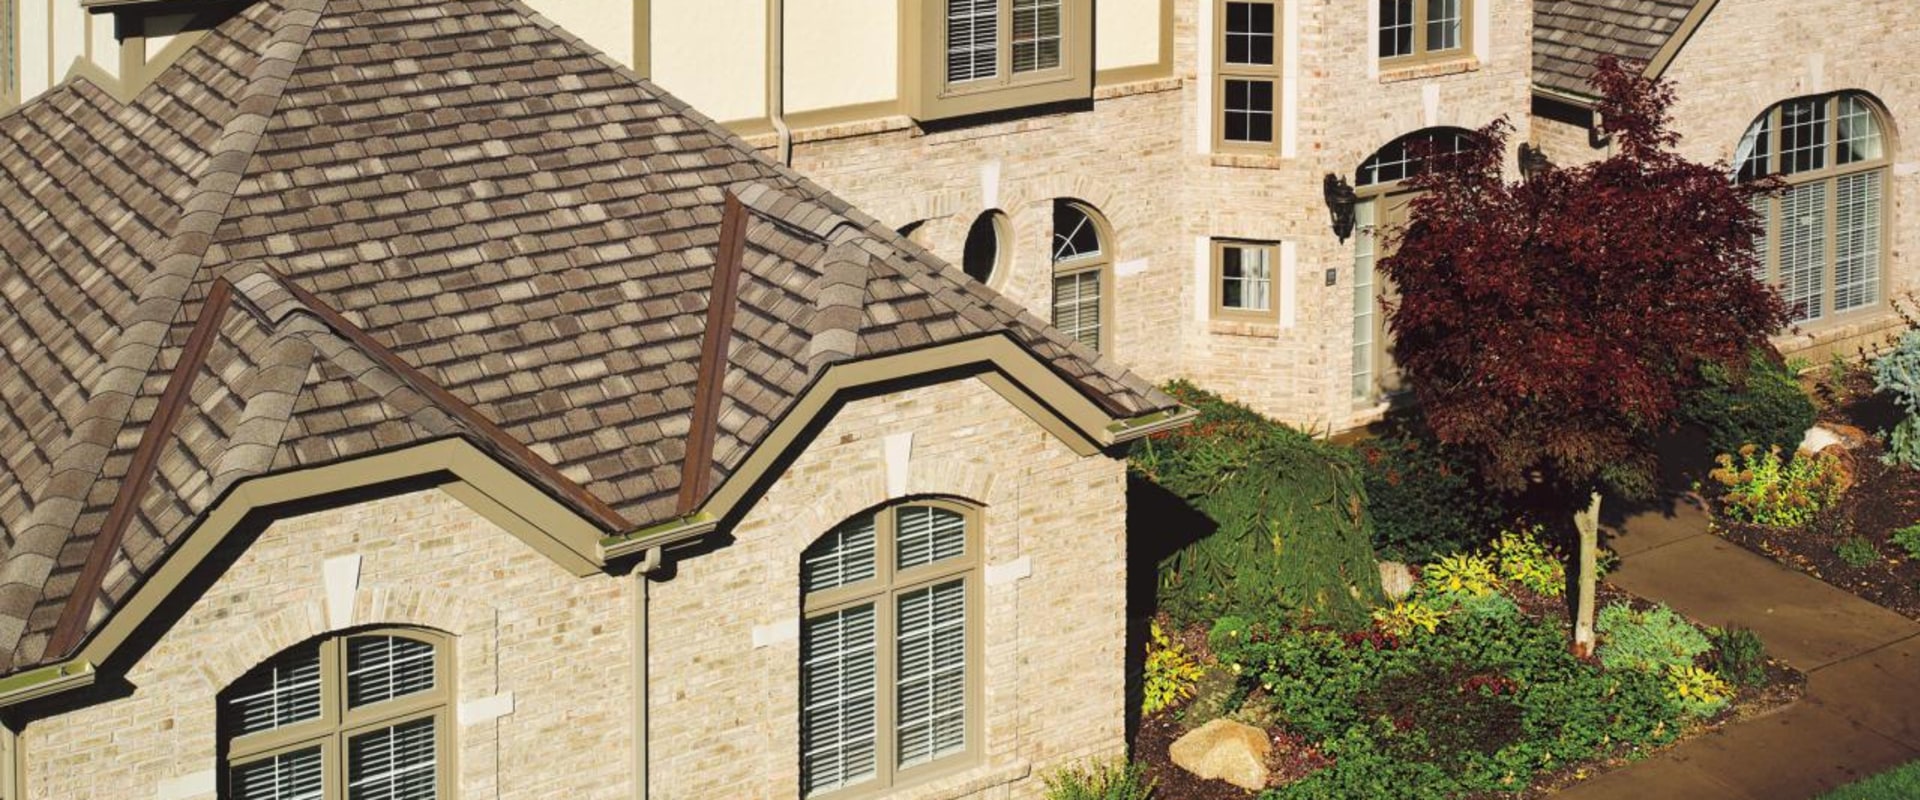 What is the most popular type of roofing material?